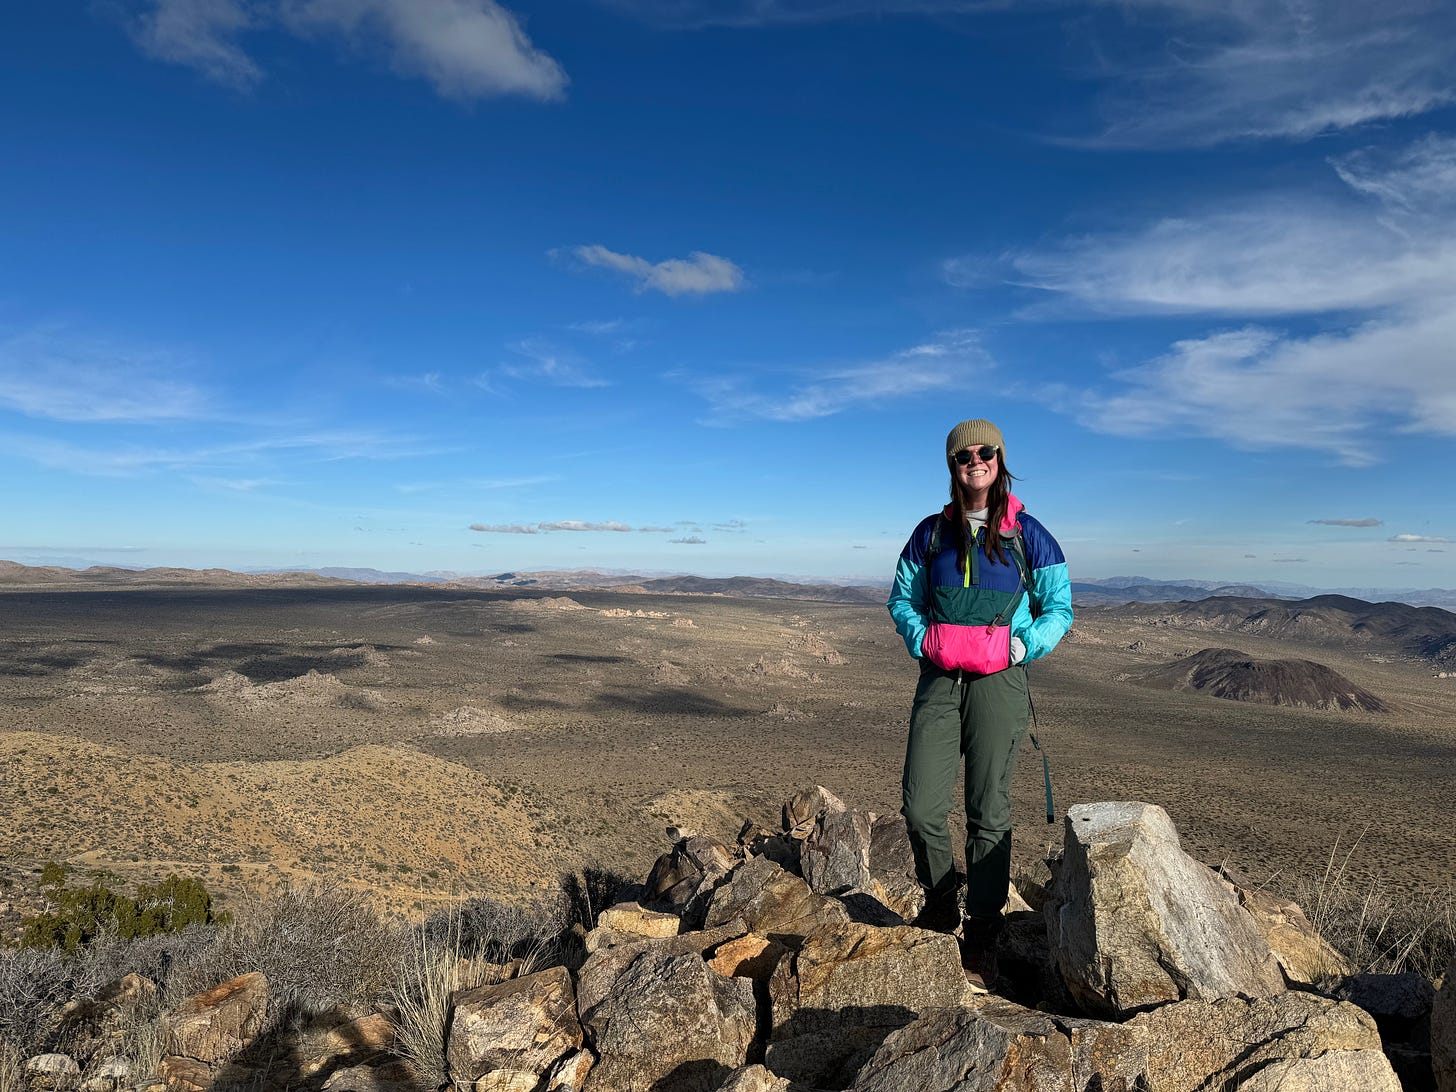 A woman with brown hair and light skin stands among rocks, which are above a vast desert below. She is wearing sunglasses, a brown beanie, green pants and a multi-colored windbreaker. The sky is blue with few clouds.